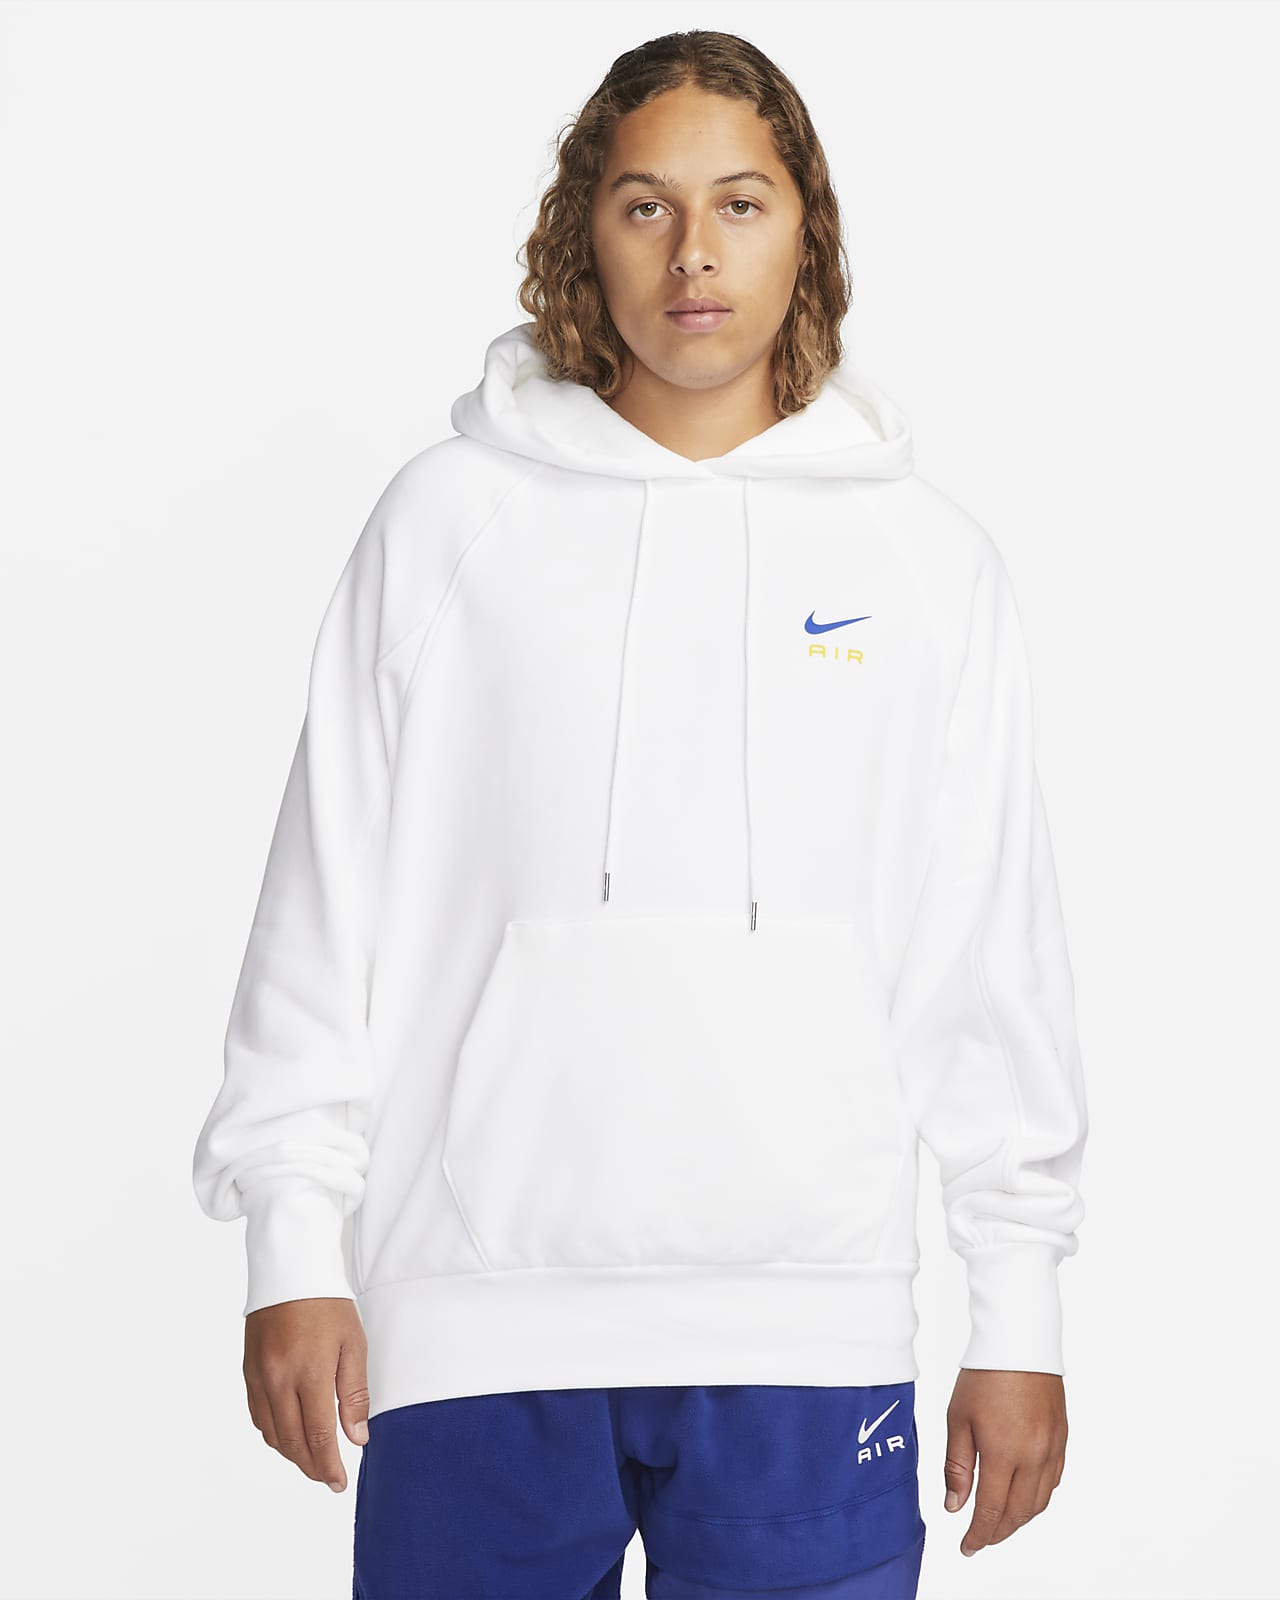 saddle eruption hand Nike Air Men's French Terry Pullover Hoodie. Nike SA